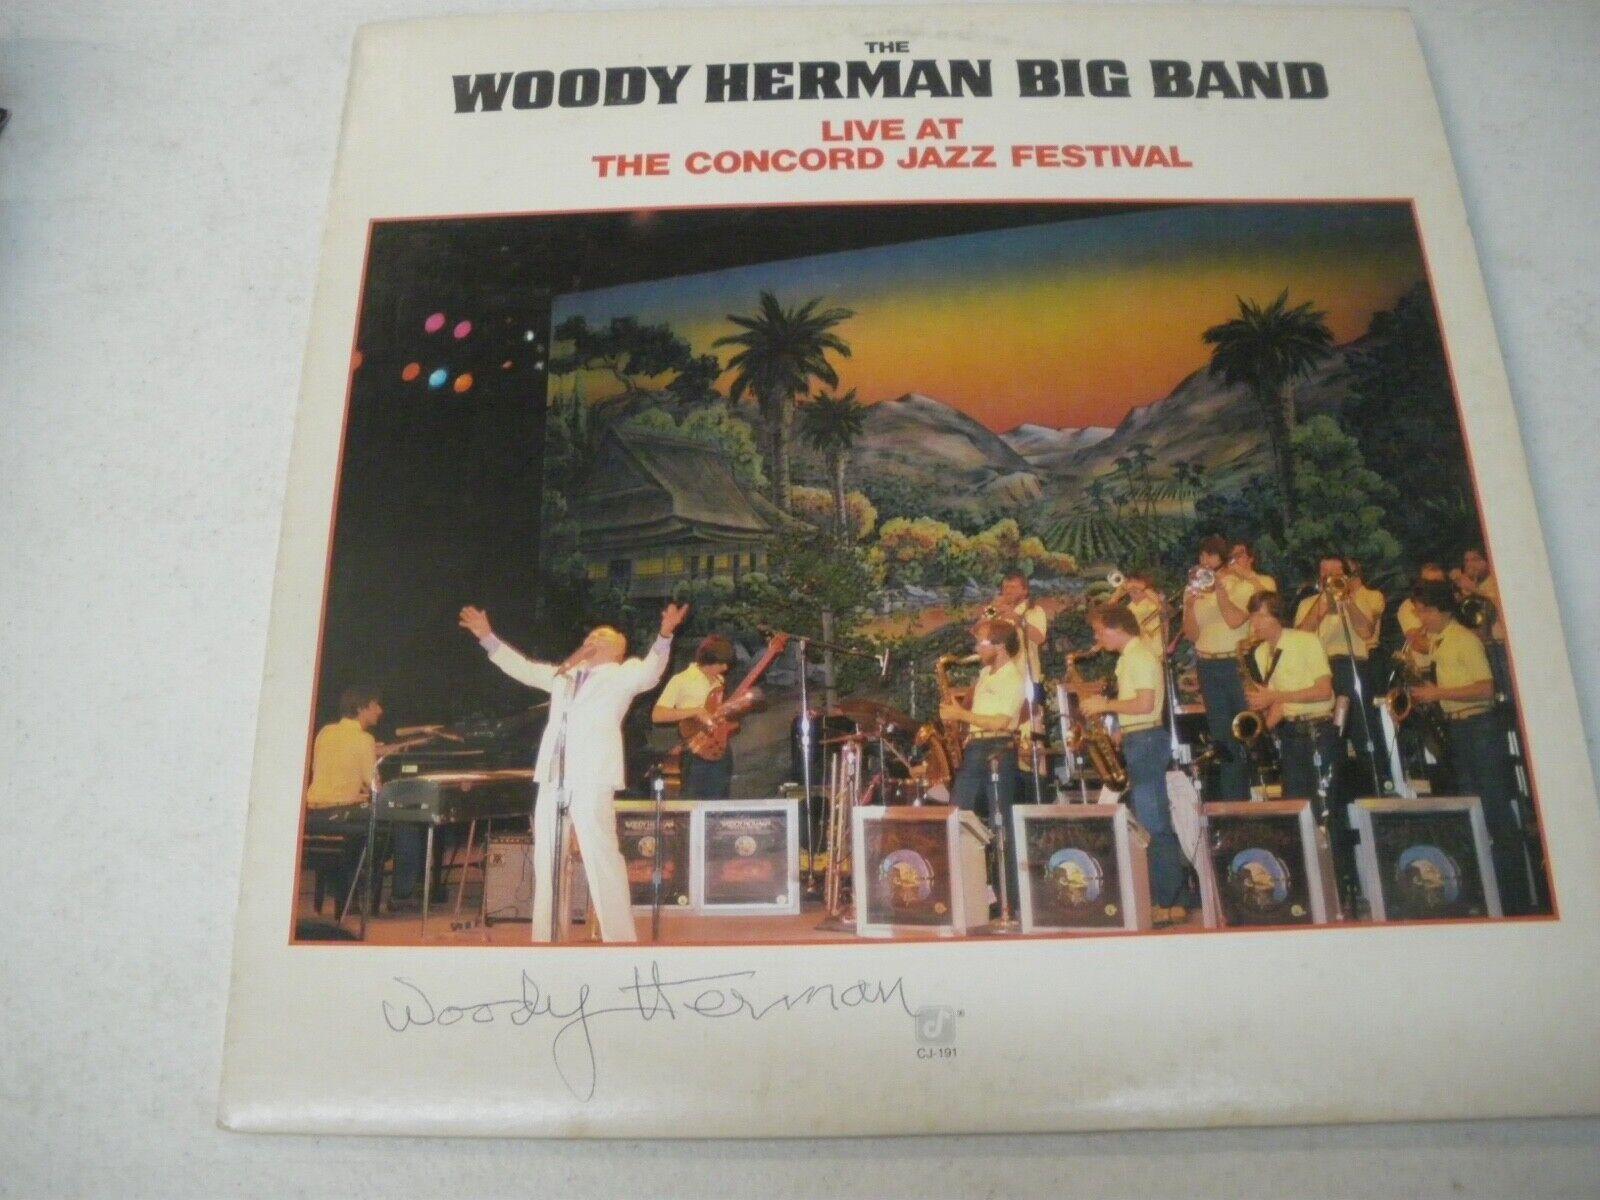 WOODY HERMAN BIG BAND / LIVE AT CONCORD JAZZ FESTIVAL / LP / 1982 / SIGNED